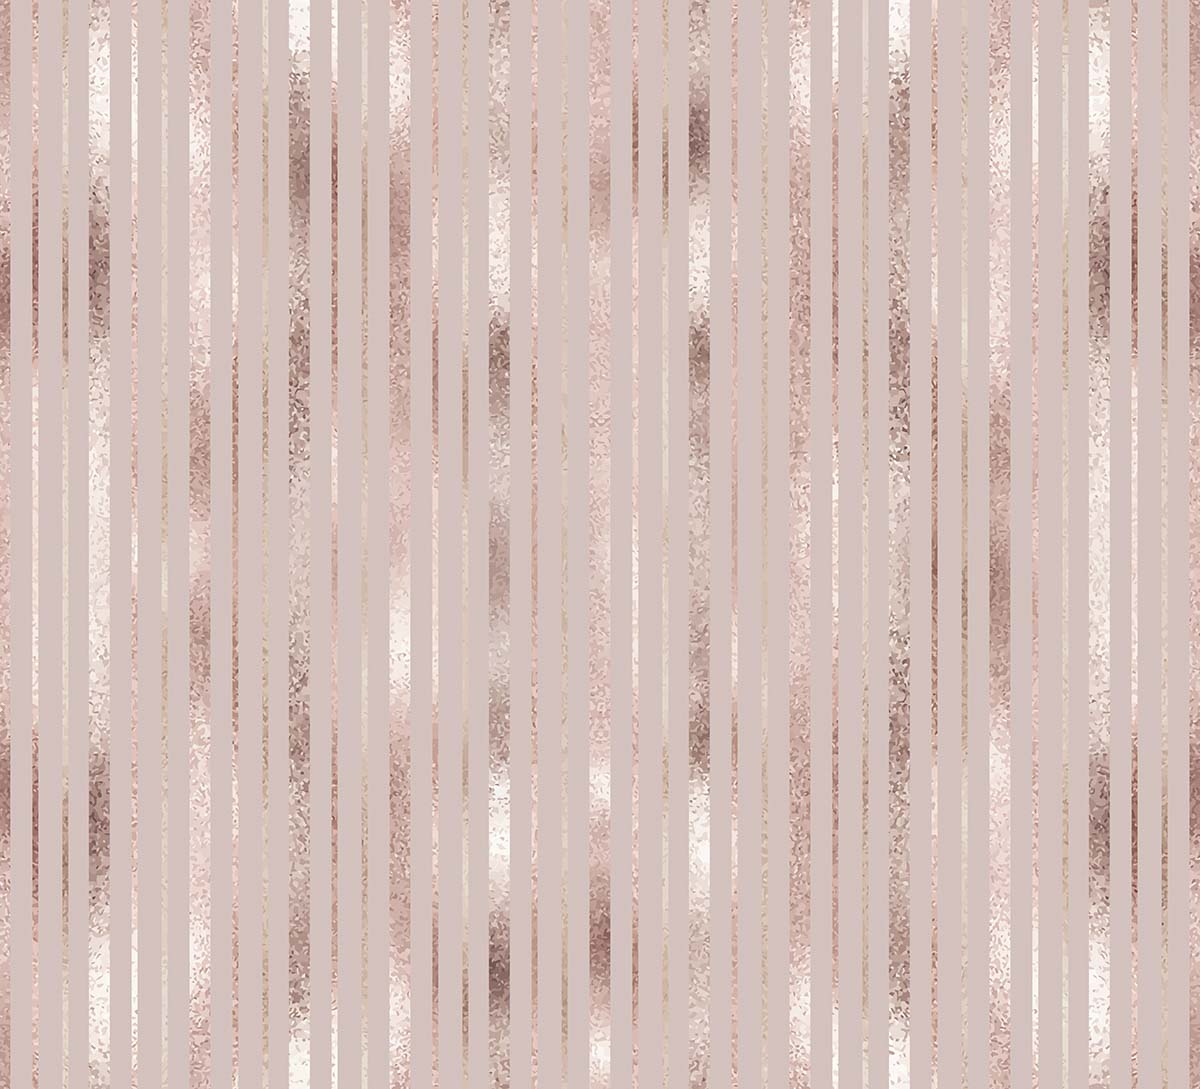 A pink and white striped background